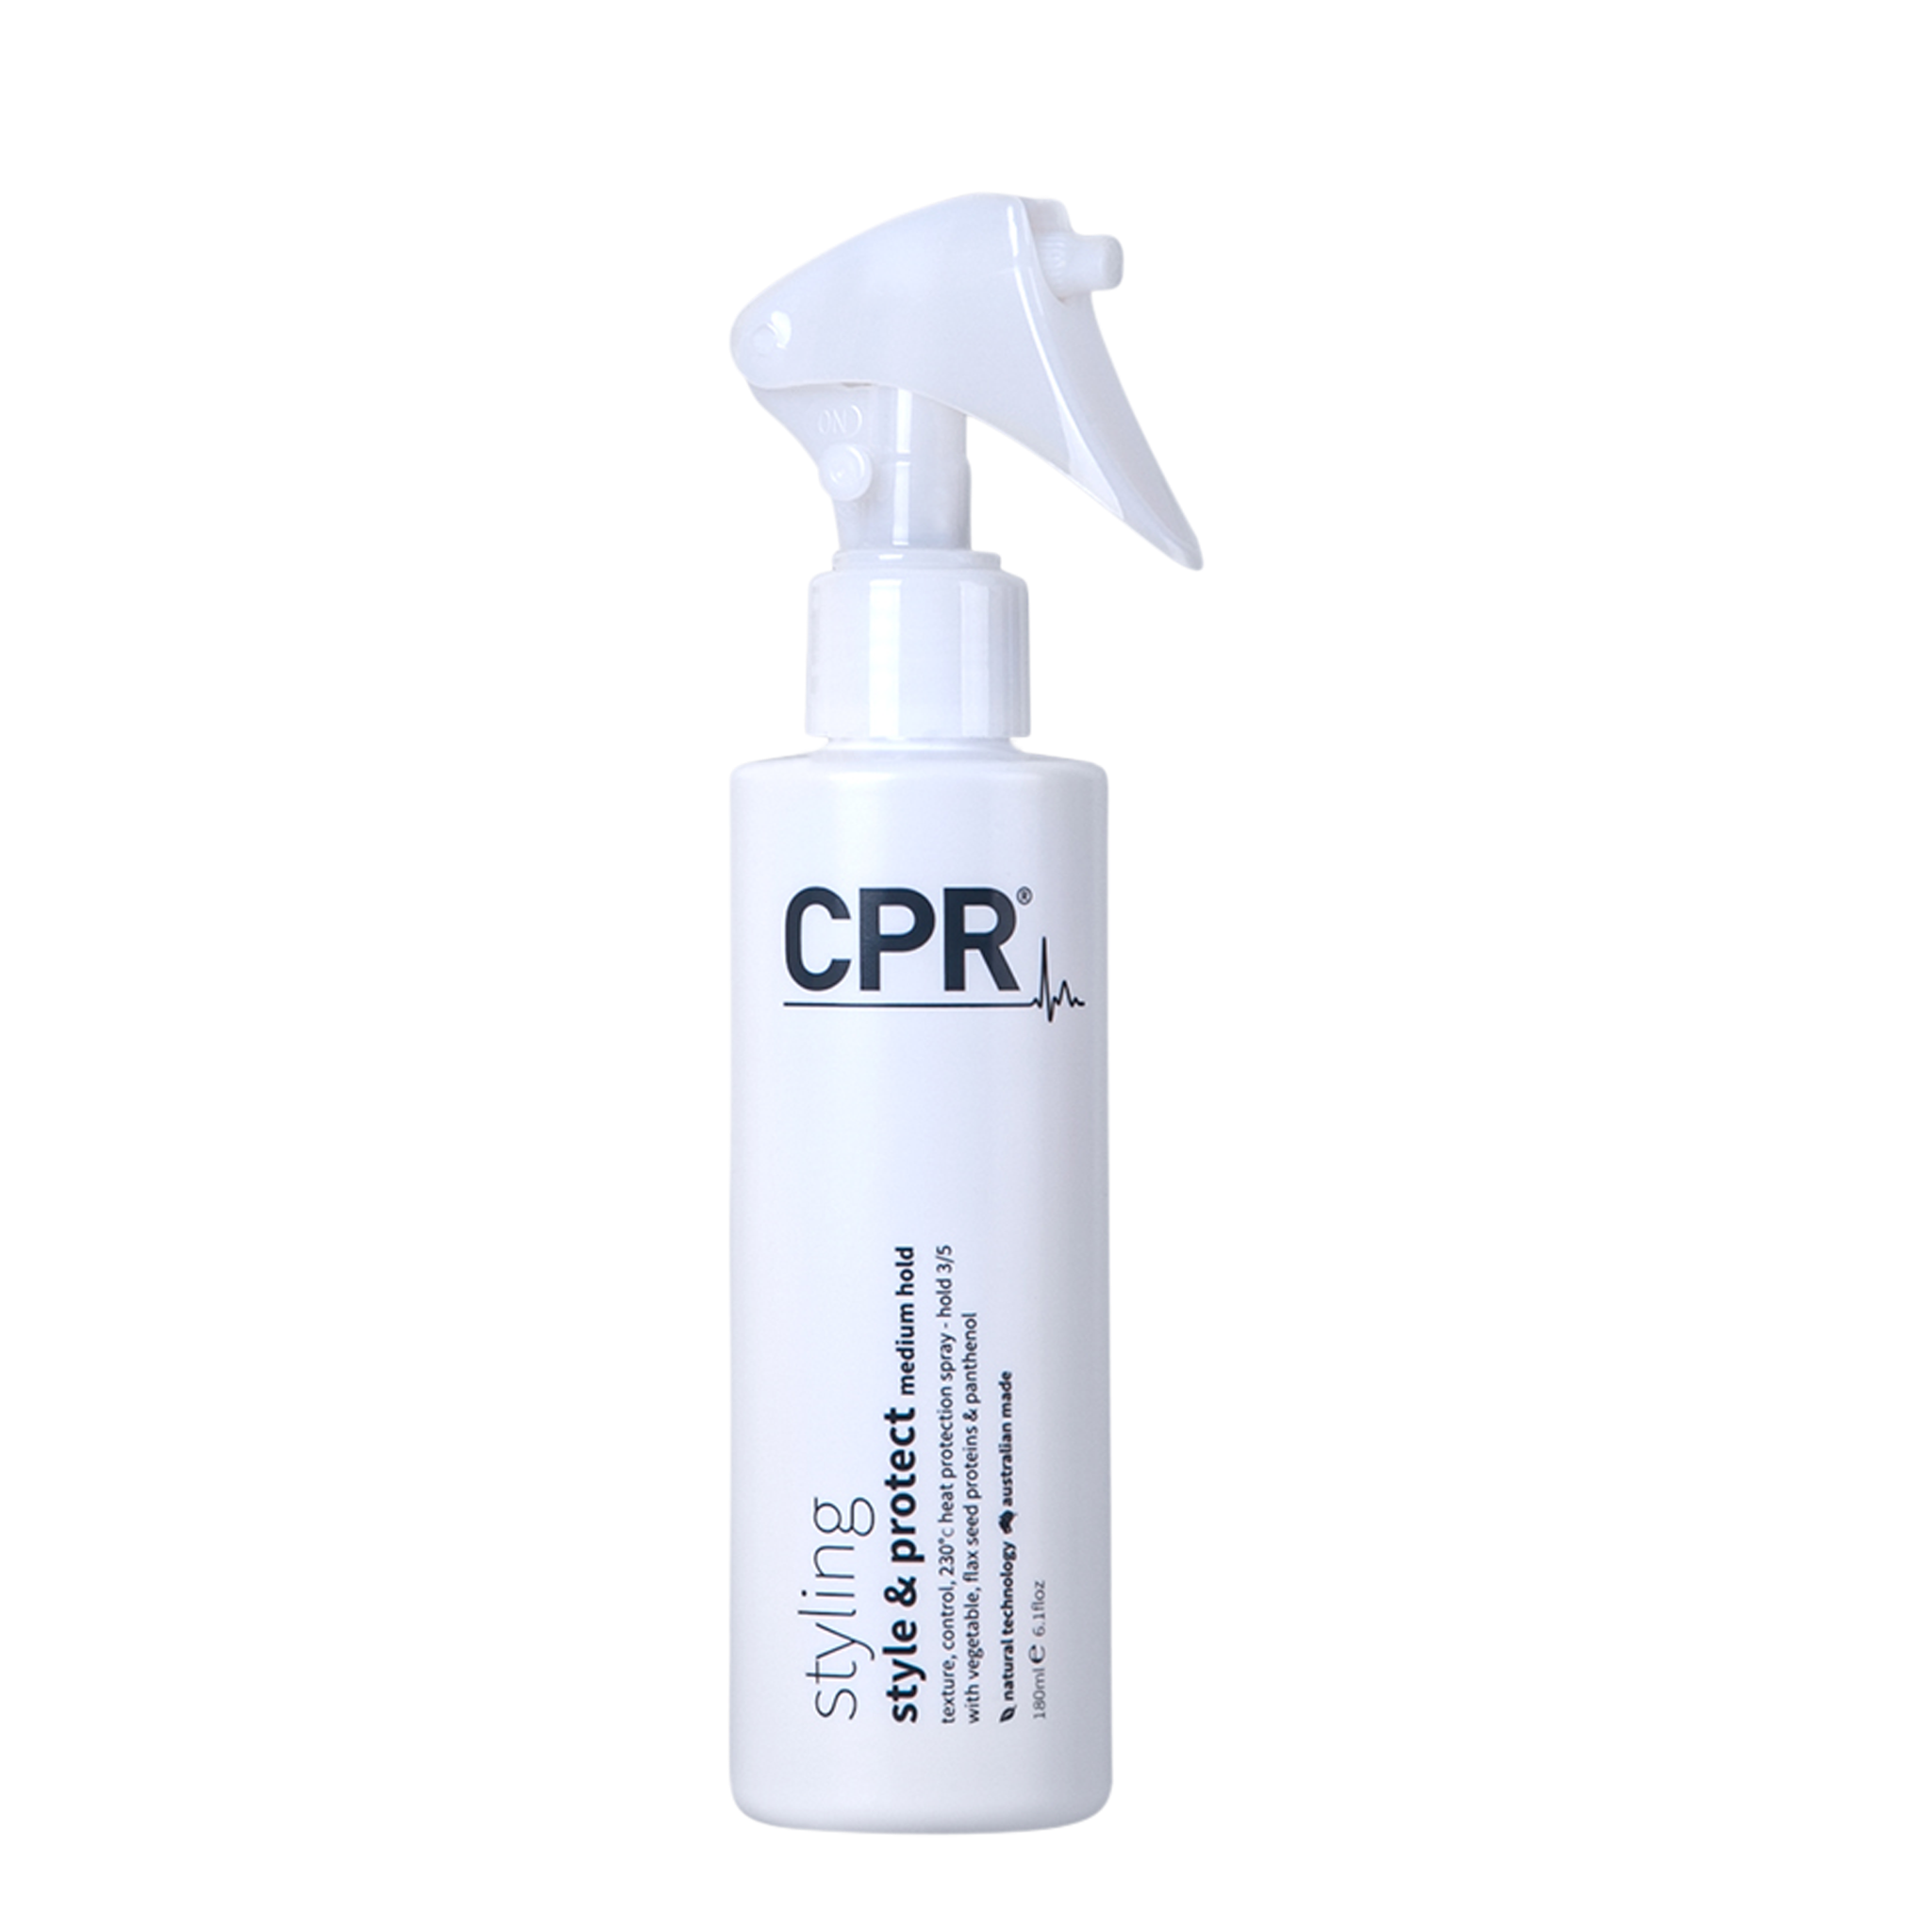 Vitafive CPR Style & Protect Styling Spray 180ml